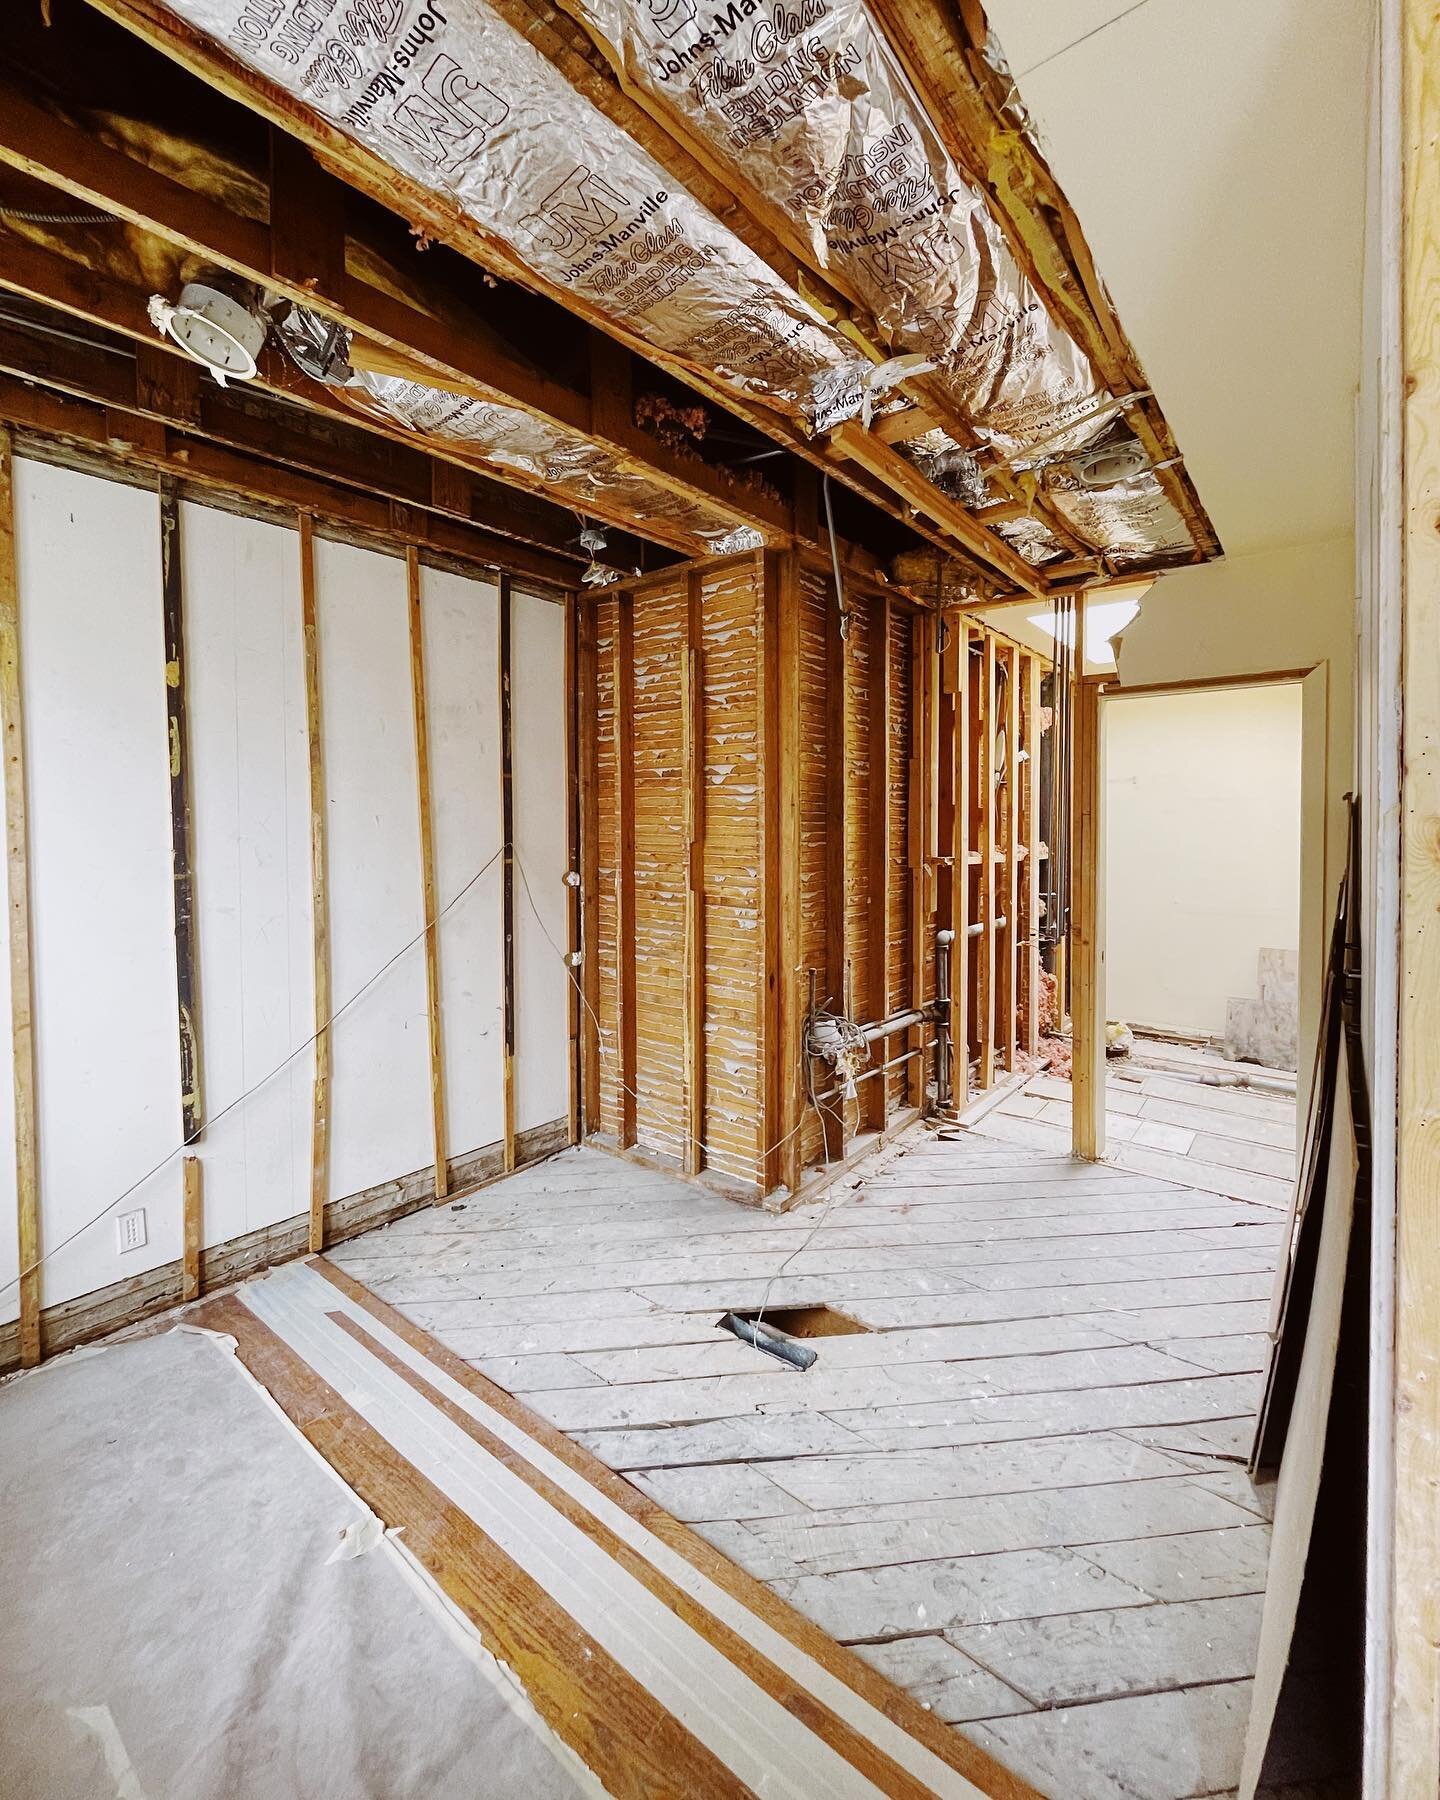 Update on the primary bath remodel, demo is 90% done. We have started laying out and look forward to framing soon!
.
.
.
.
.
.
.
.
.
#chicago #generalcontractor #generalcontractorchicago #demo #framing #carpentry #custombathroom